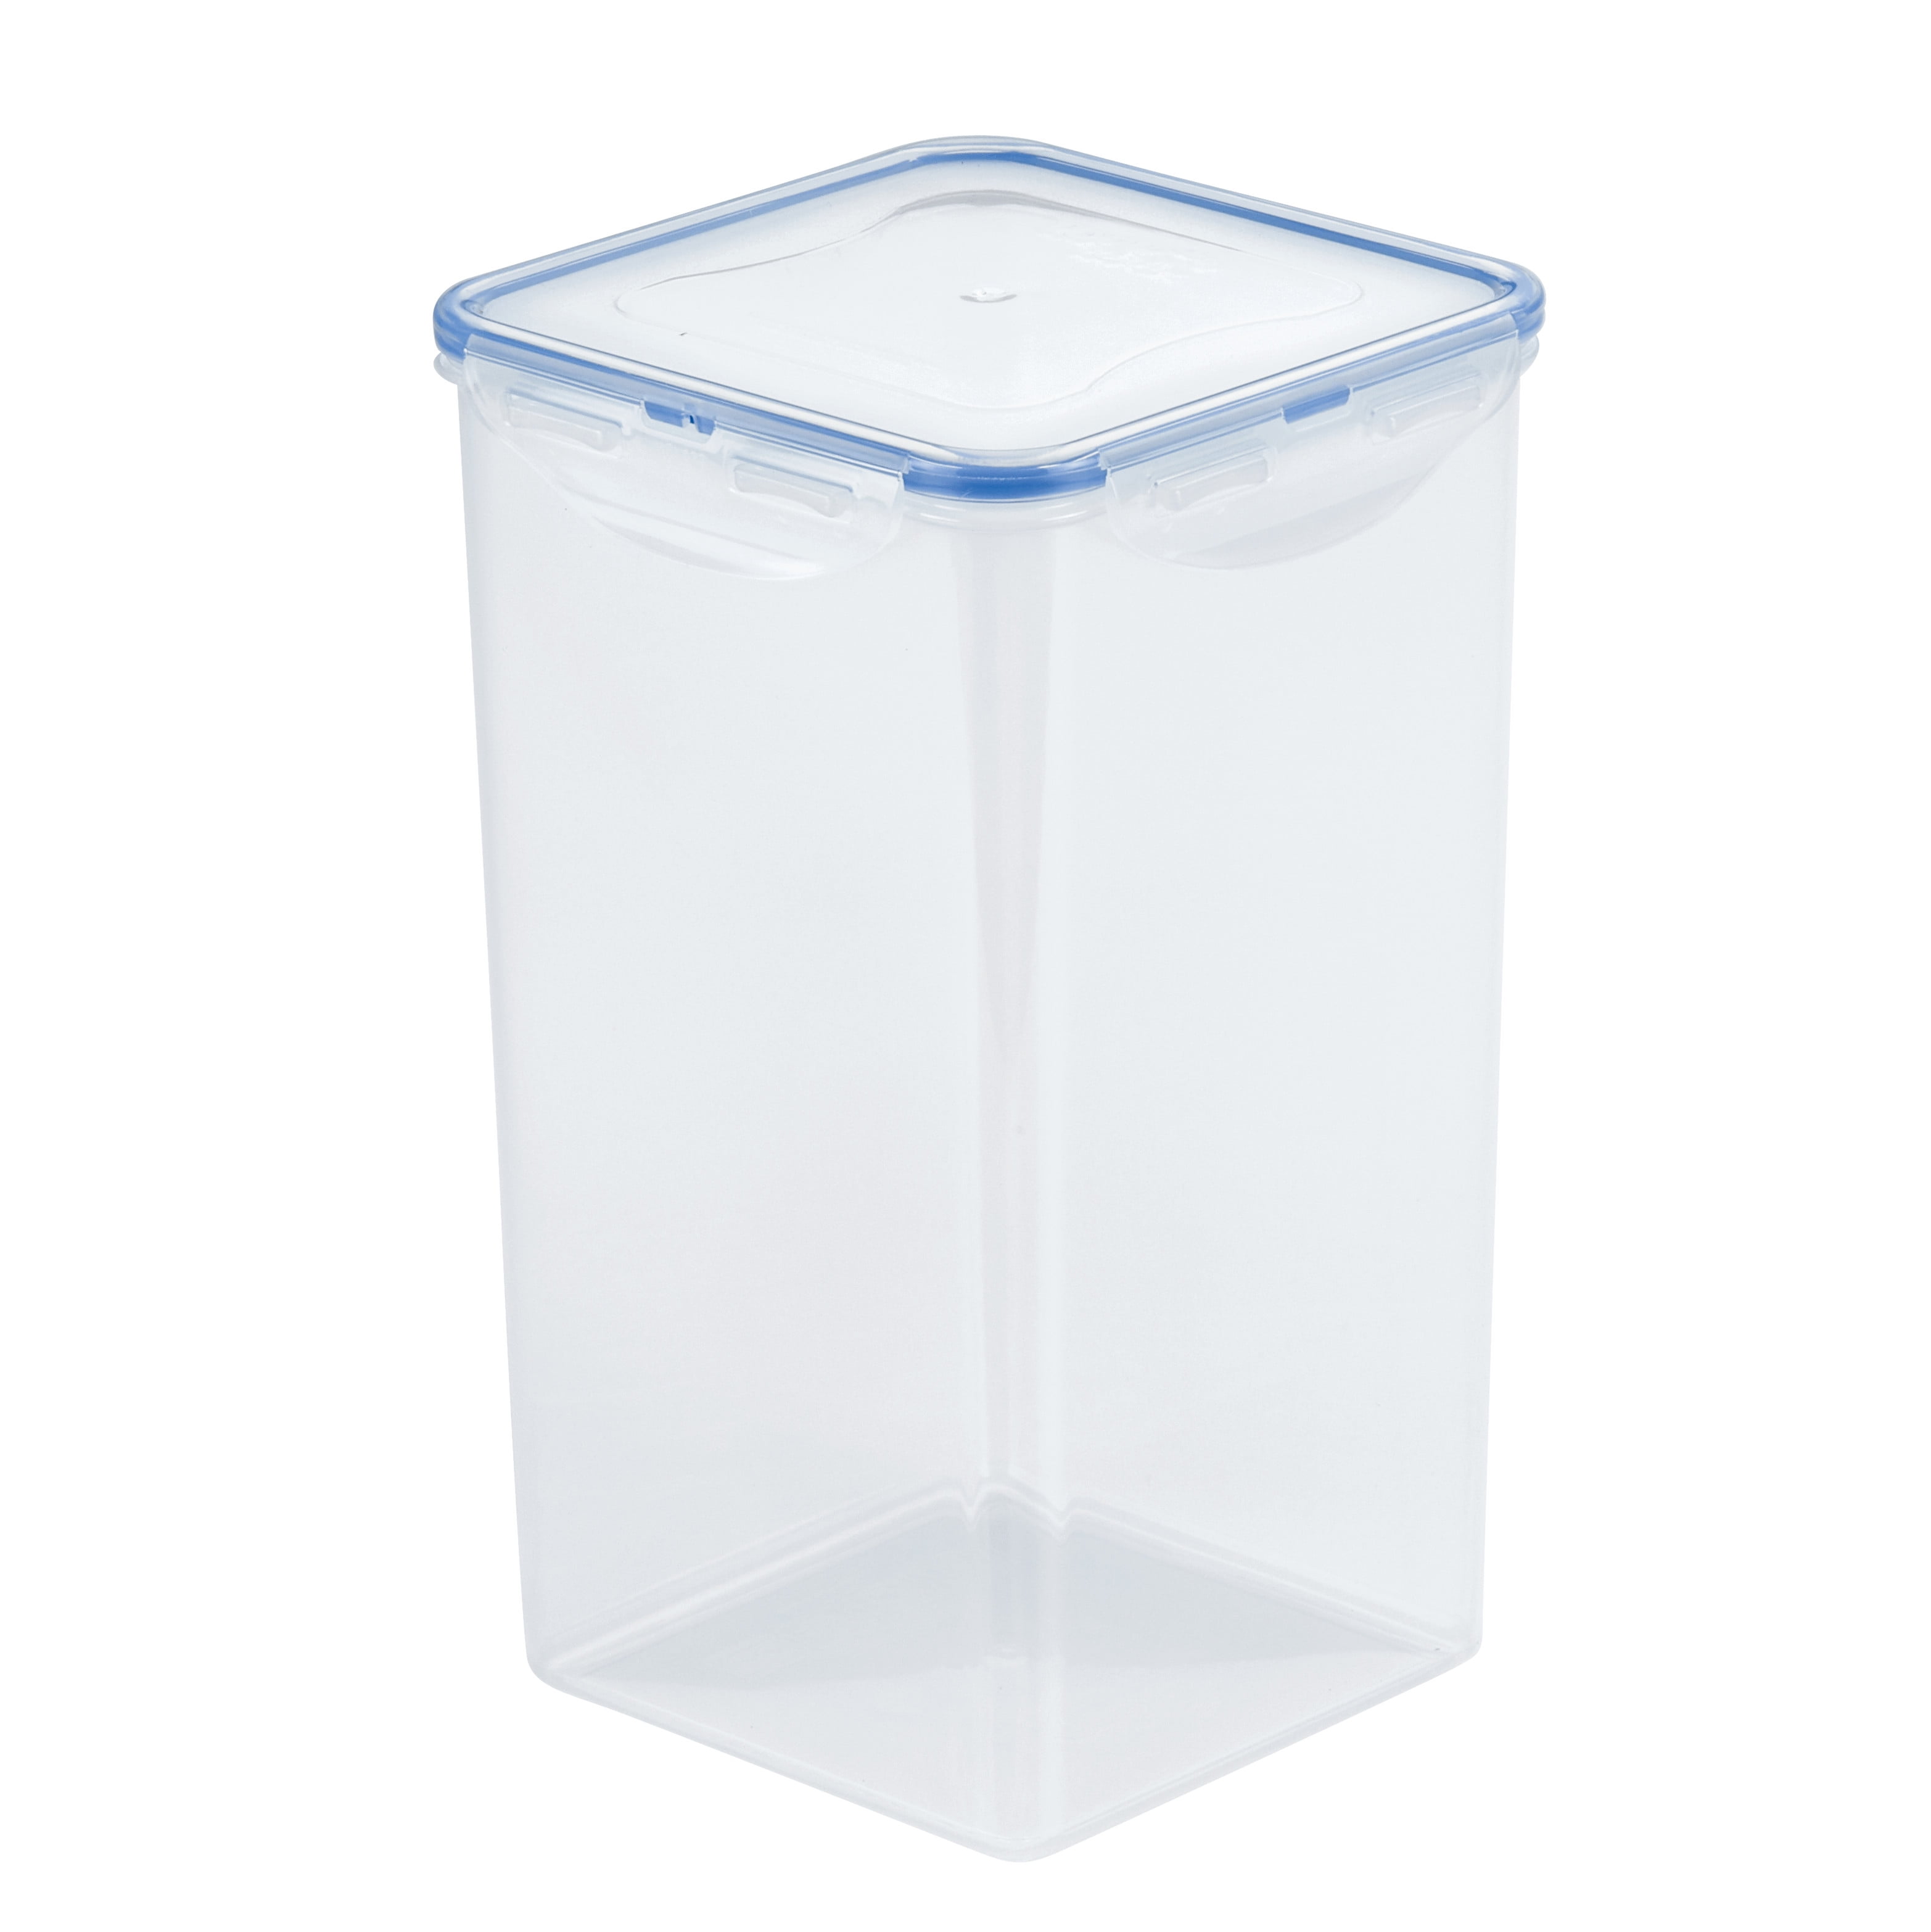 LocknLock Pantry Square Food Storage Container, 16.9-Cup - Walmart.com